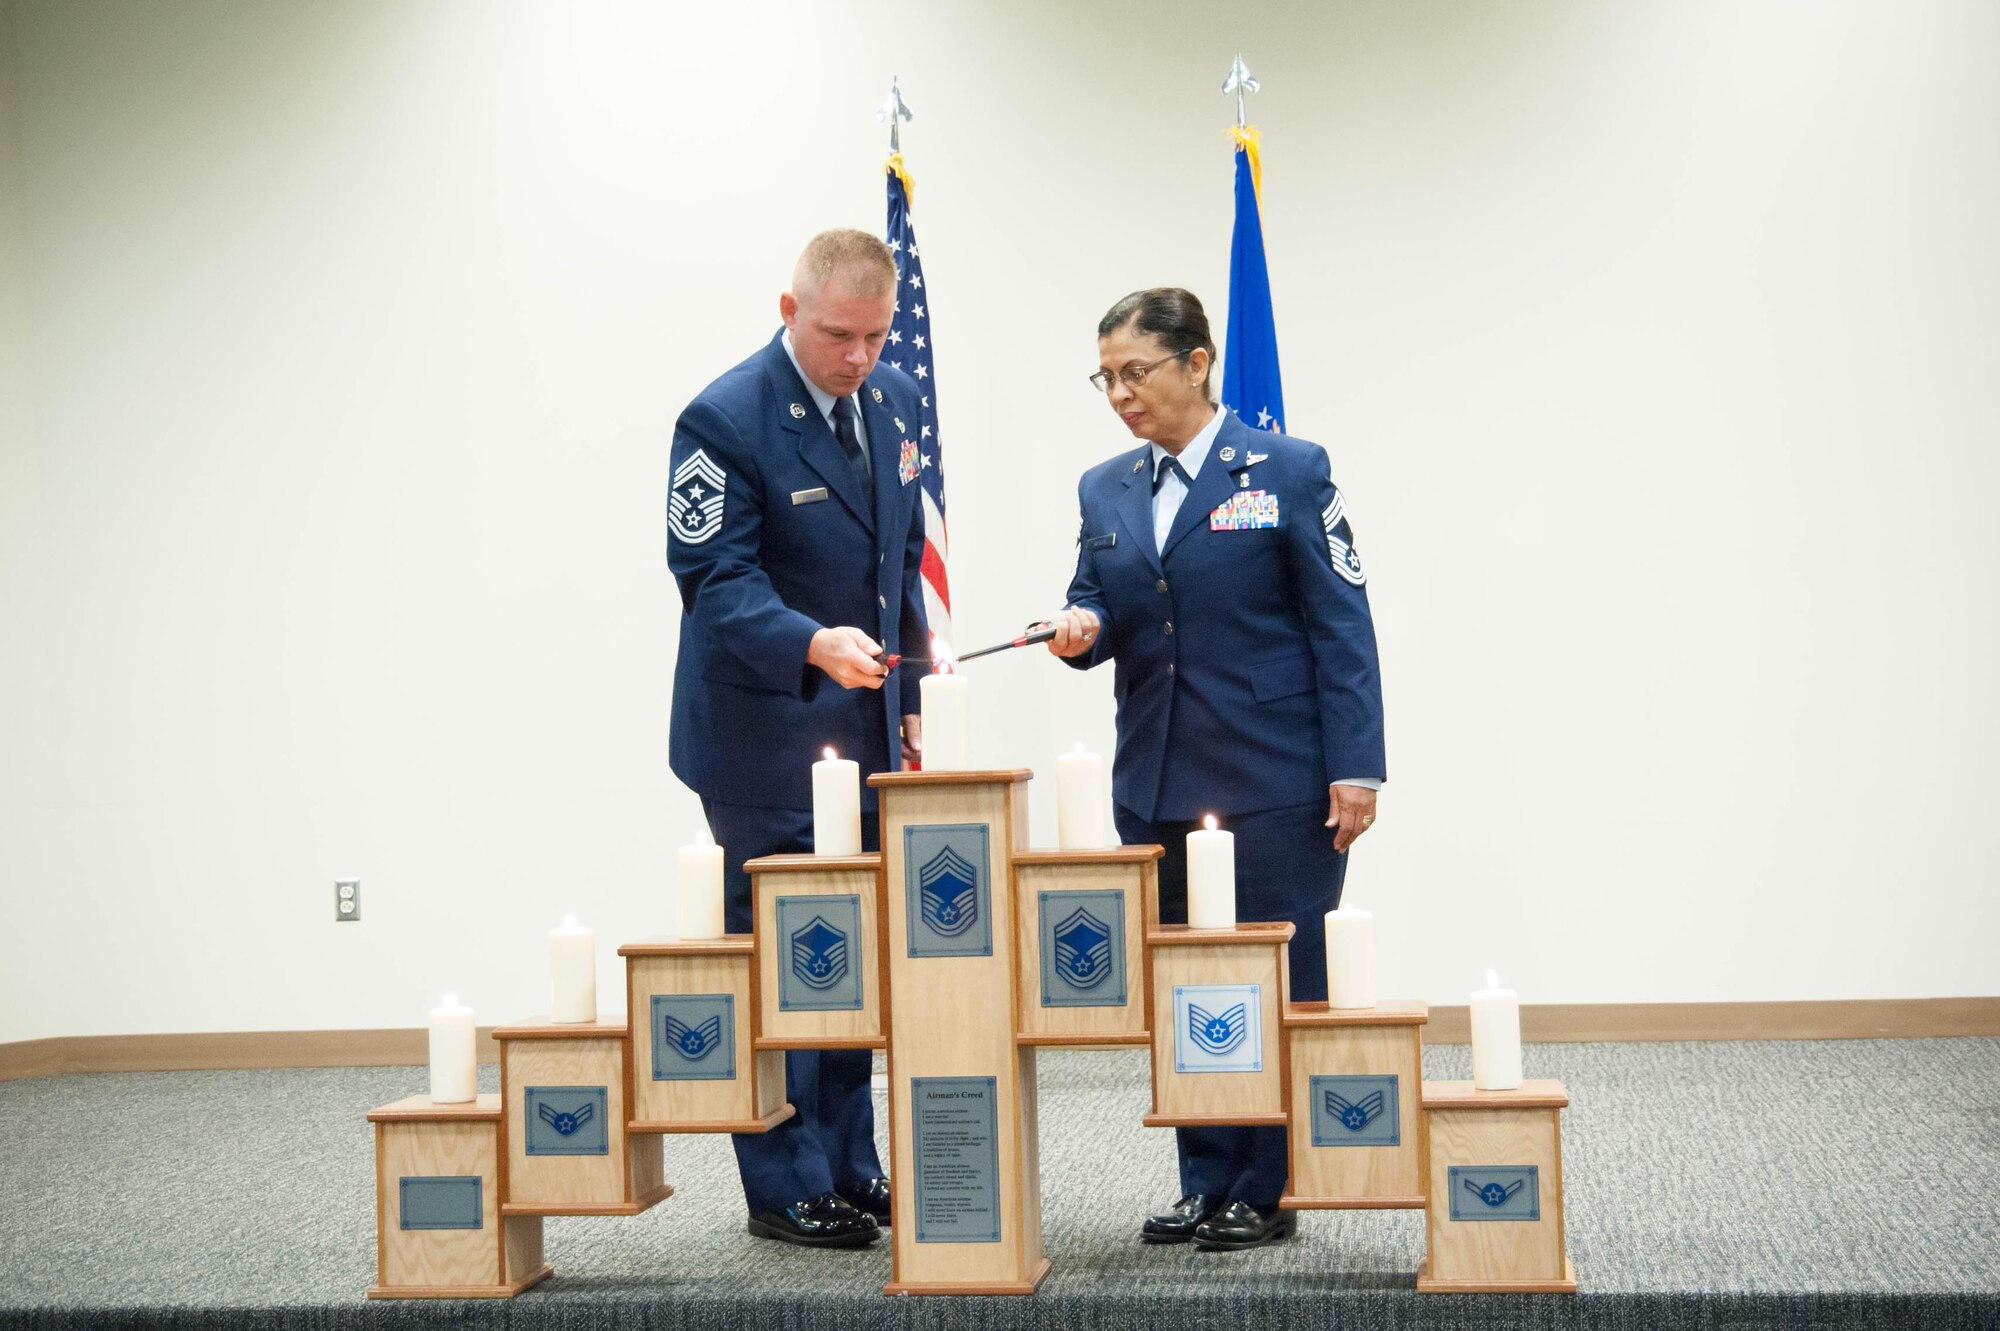 Cheif Master Sgt. Chris Barnby, 403rd Wing command chief and Chief Master Sgt. Josephine Keller, 403rd Aeromedical Staging Squadron superintendent light the candle that represents reaching the rank of chief master sergent during the 403rd Wing's noncomissioned and senior noncomissioned officer induction ceremony at the Roberts Consolidated Aircraft Maintenance facility Oct. 16. (U.S. Air Force photo/Senior Airman Heather Heiney)